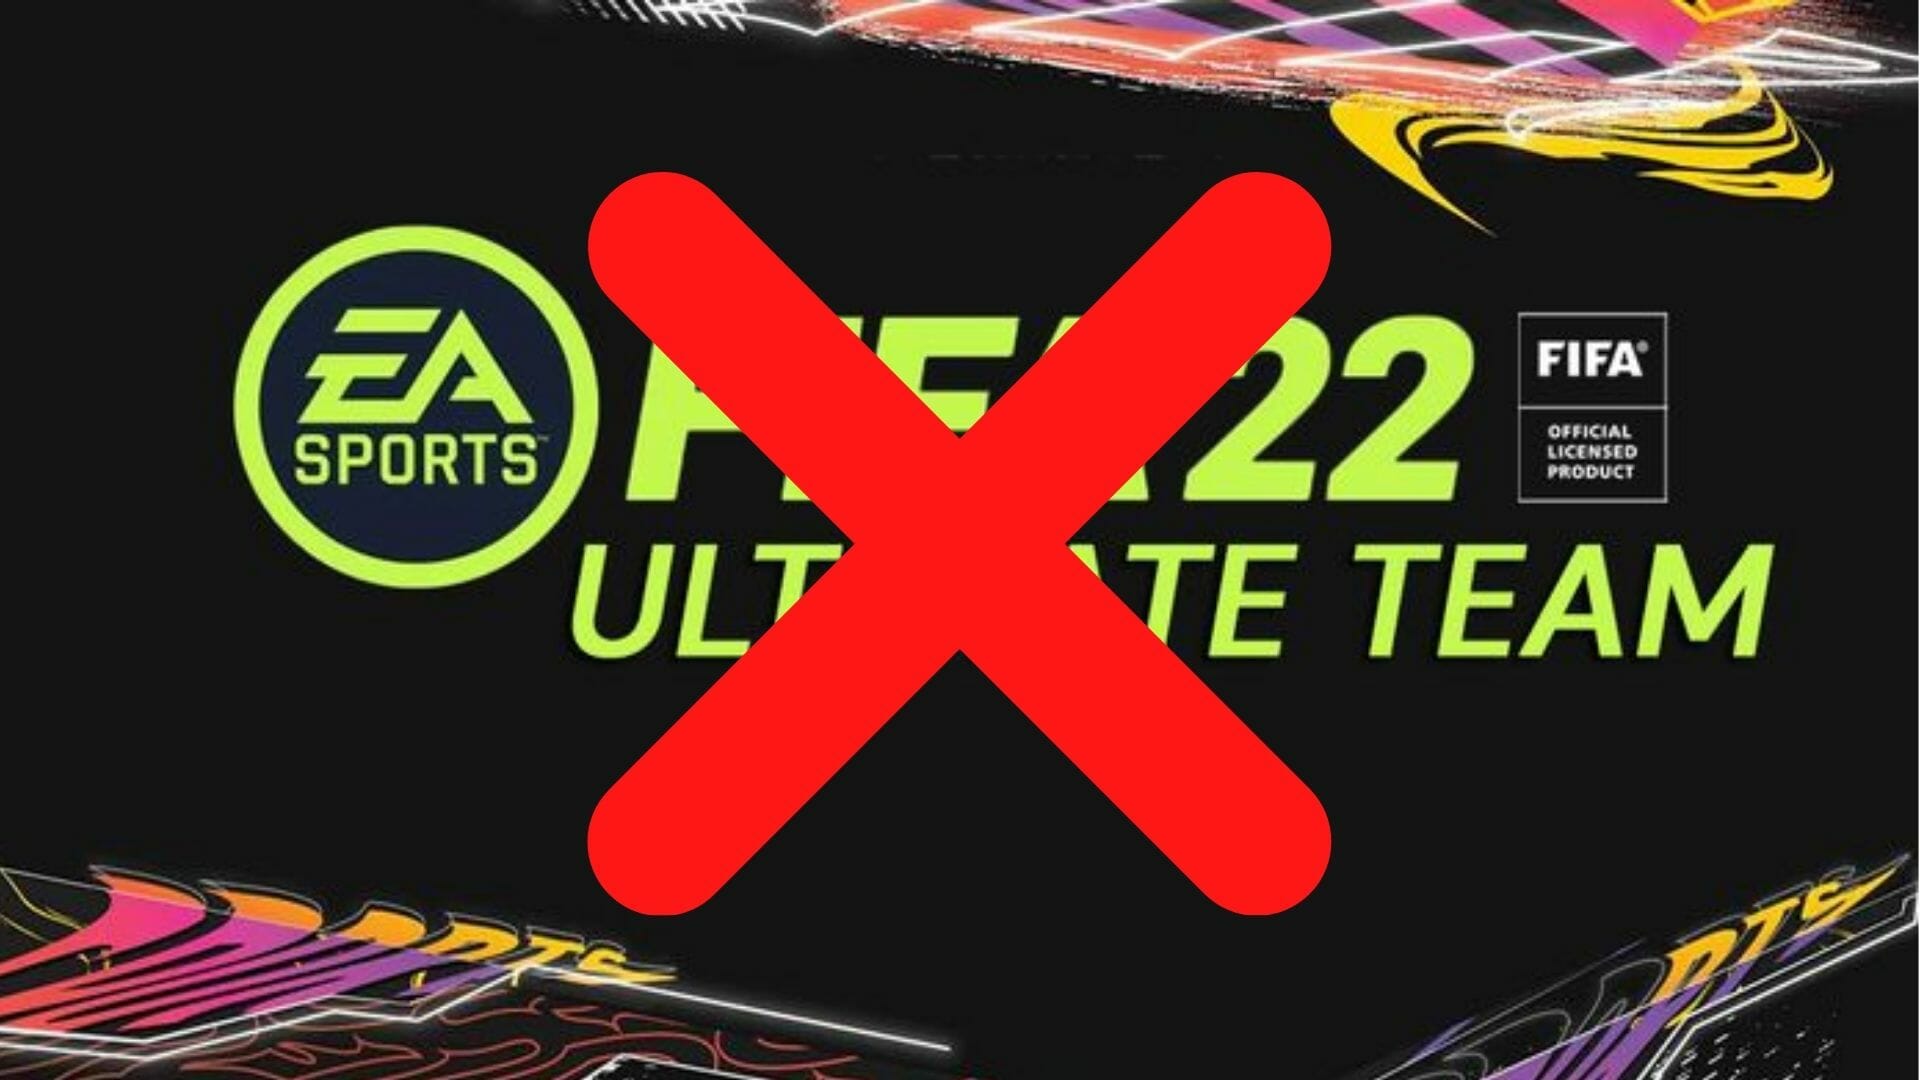 fifa 22 ultimate logo crossed out